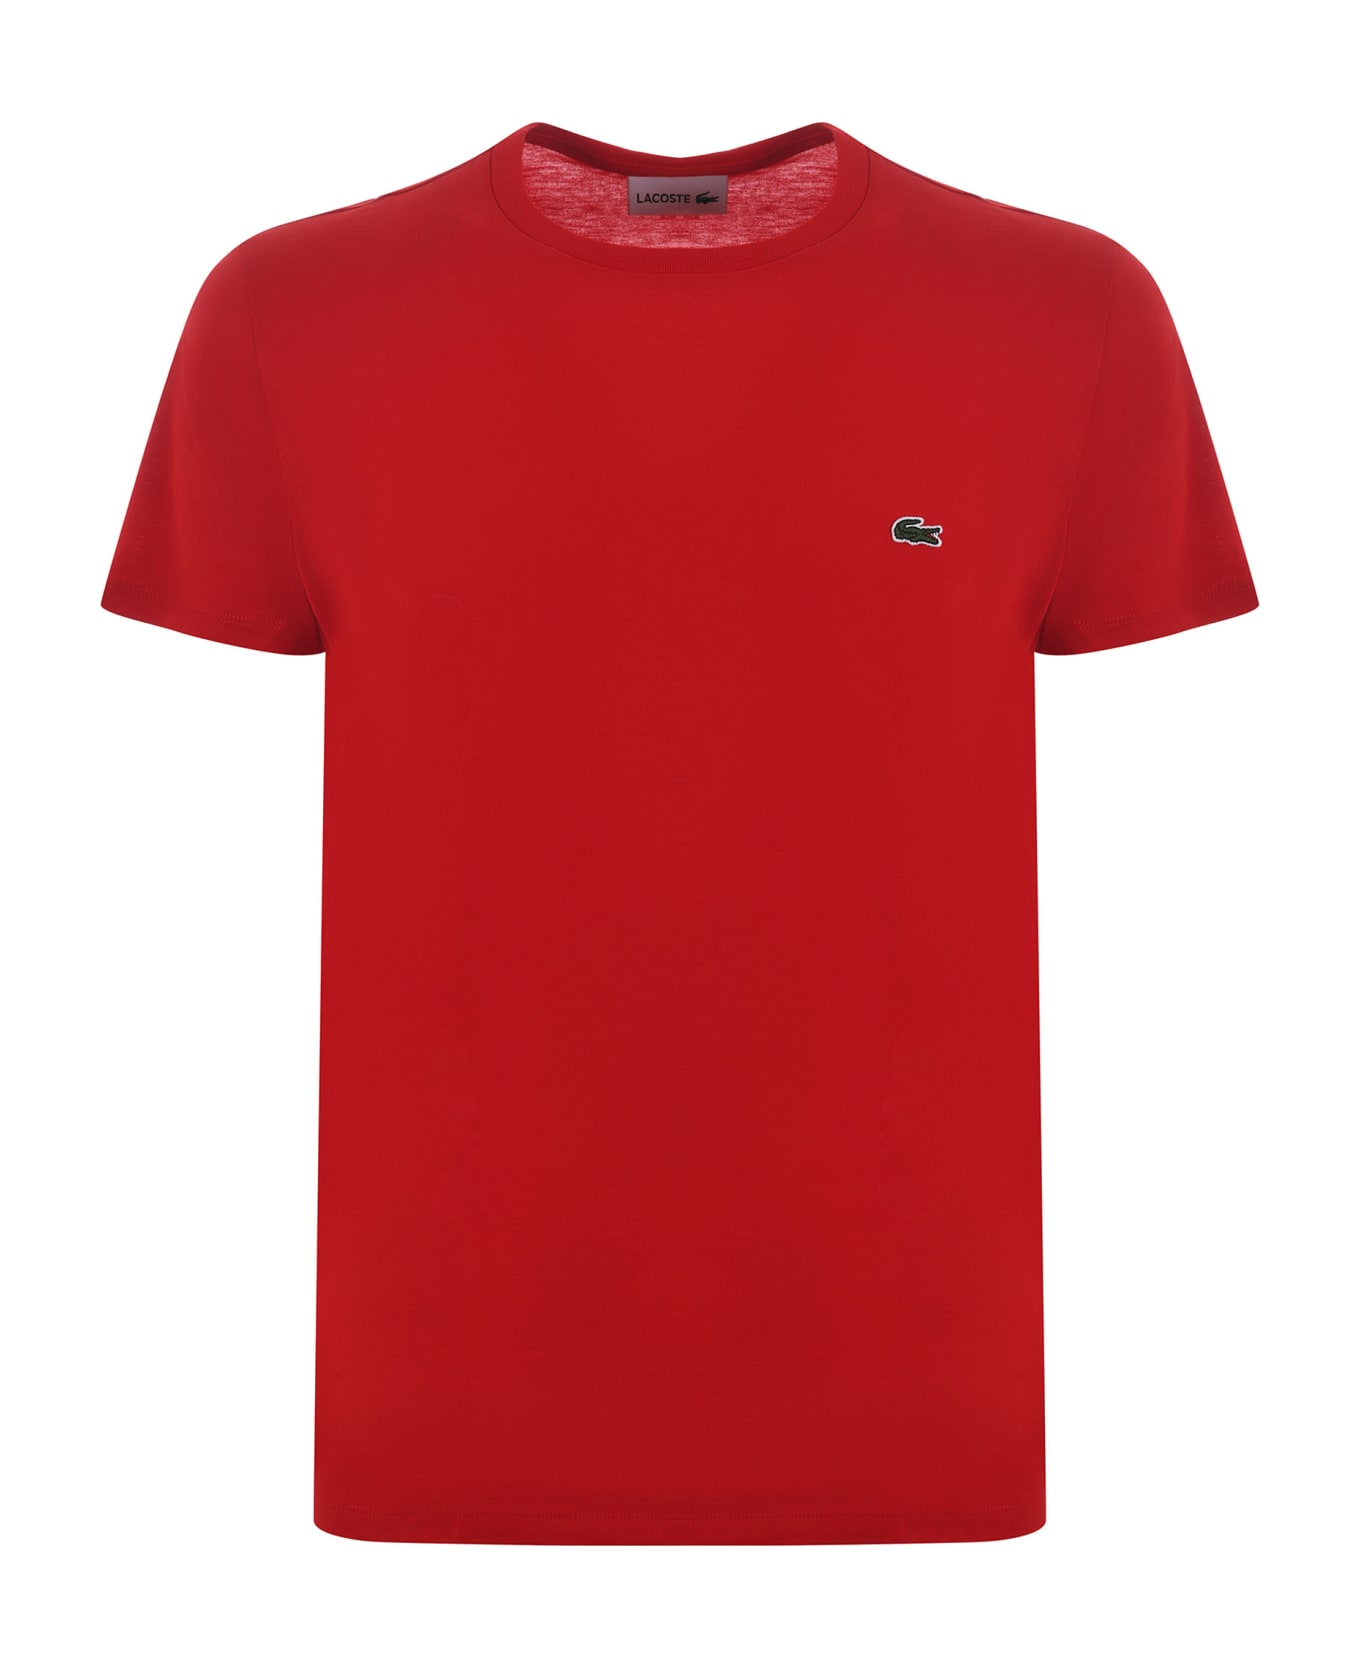 Lacoste T-shirt - Rosso